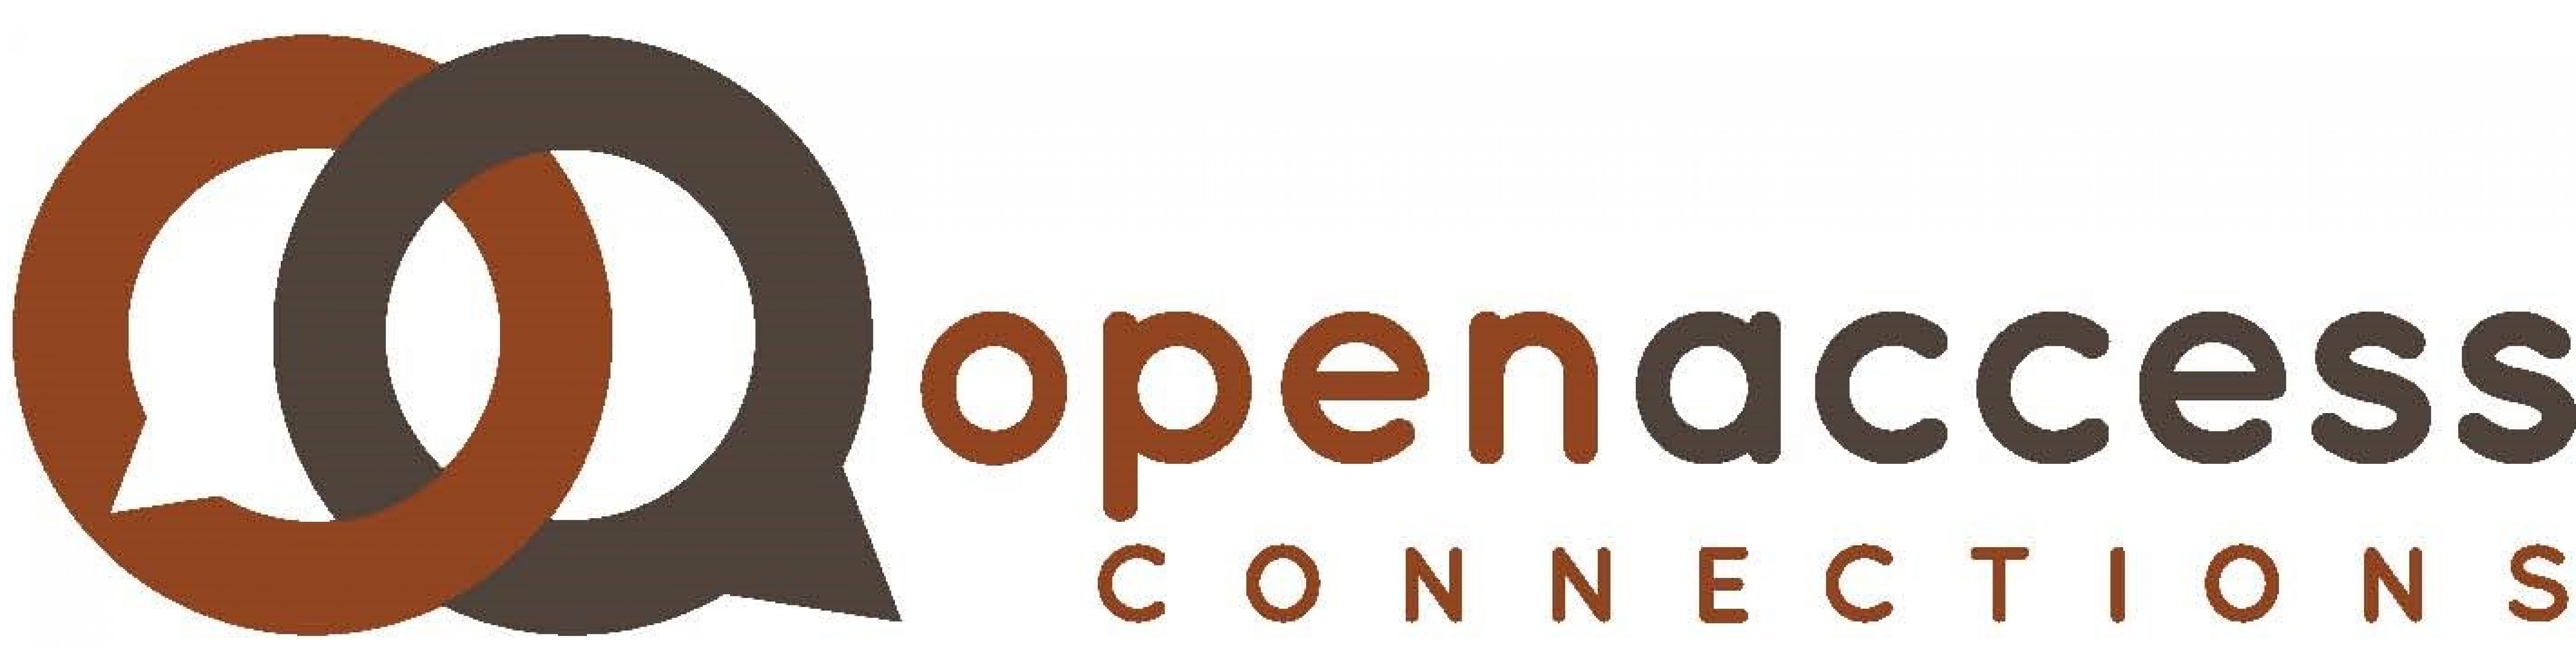 Open Access Connections